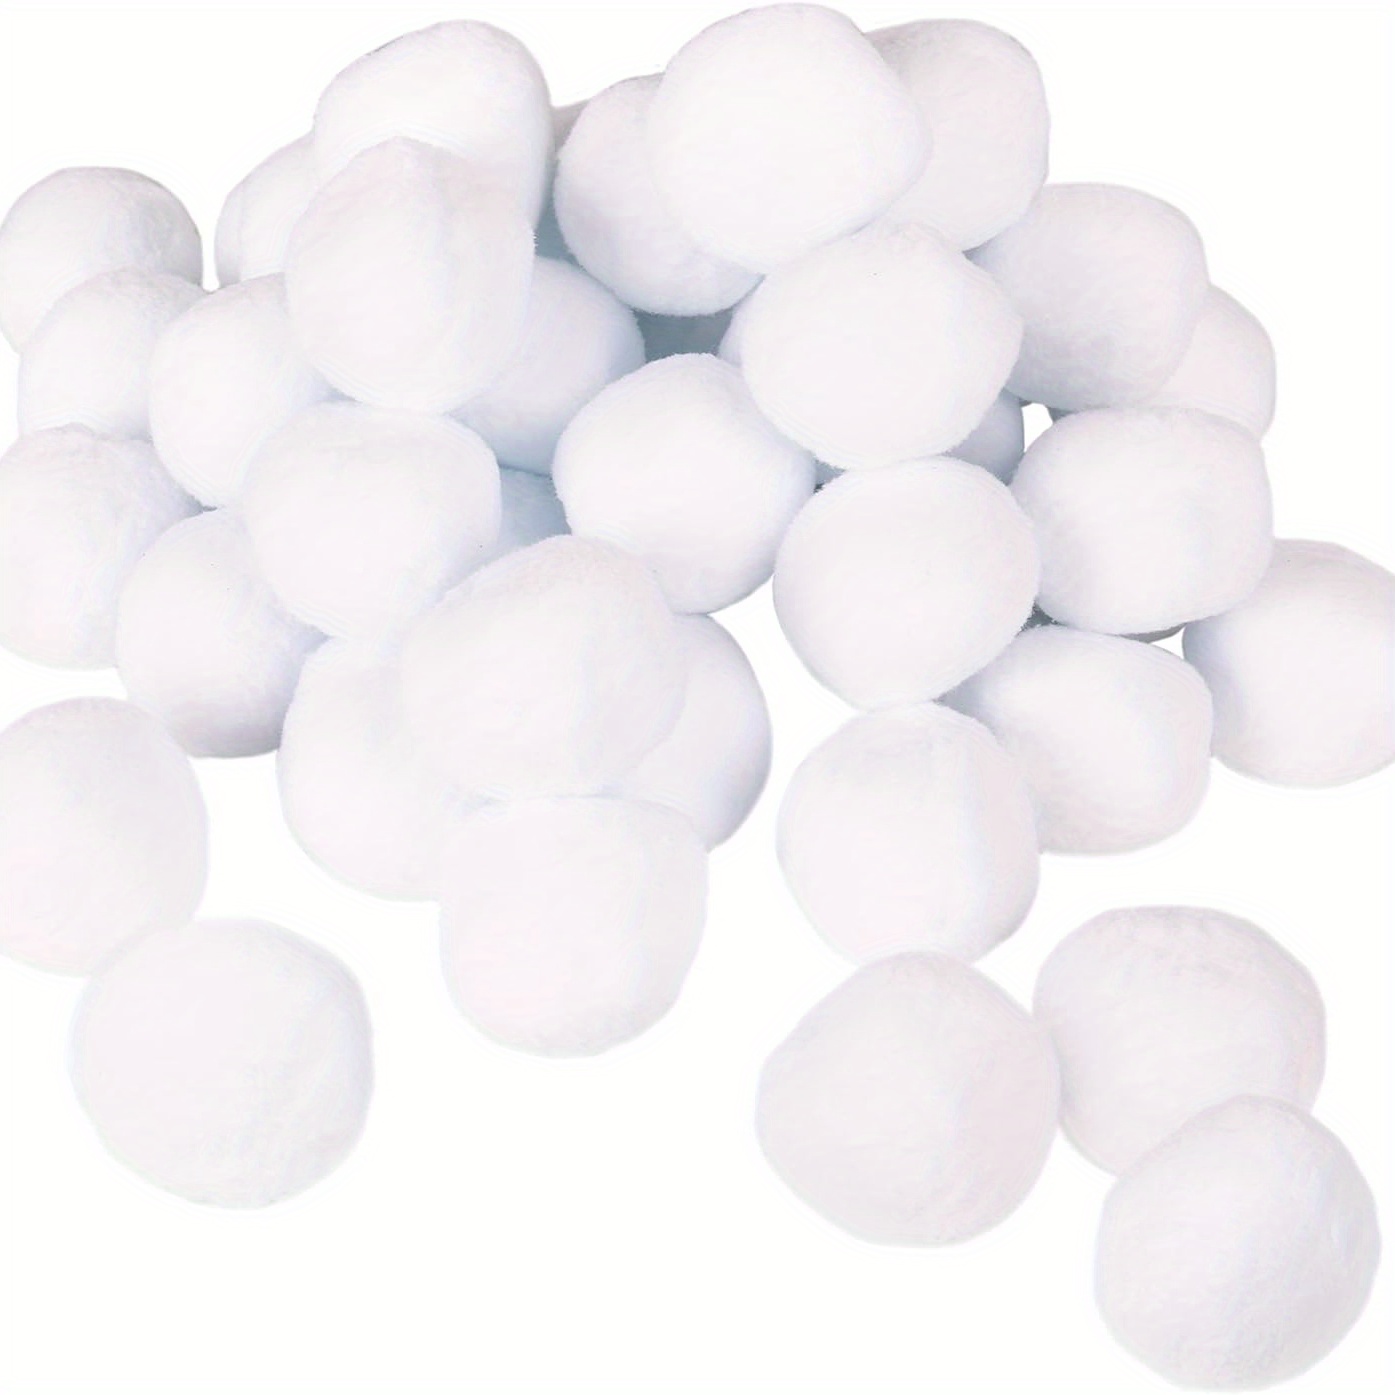 10pcs Fake Snowballs - Indoor Snowball - Artificial Snowballs For Outdoor  Snow Play And Christmas Tree Decorations